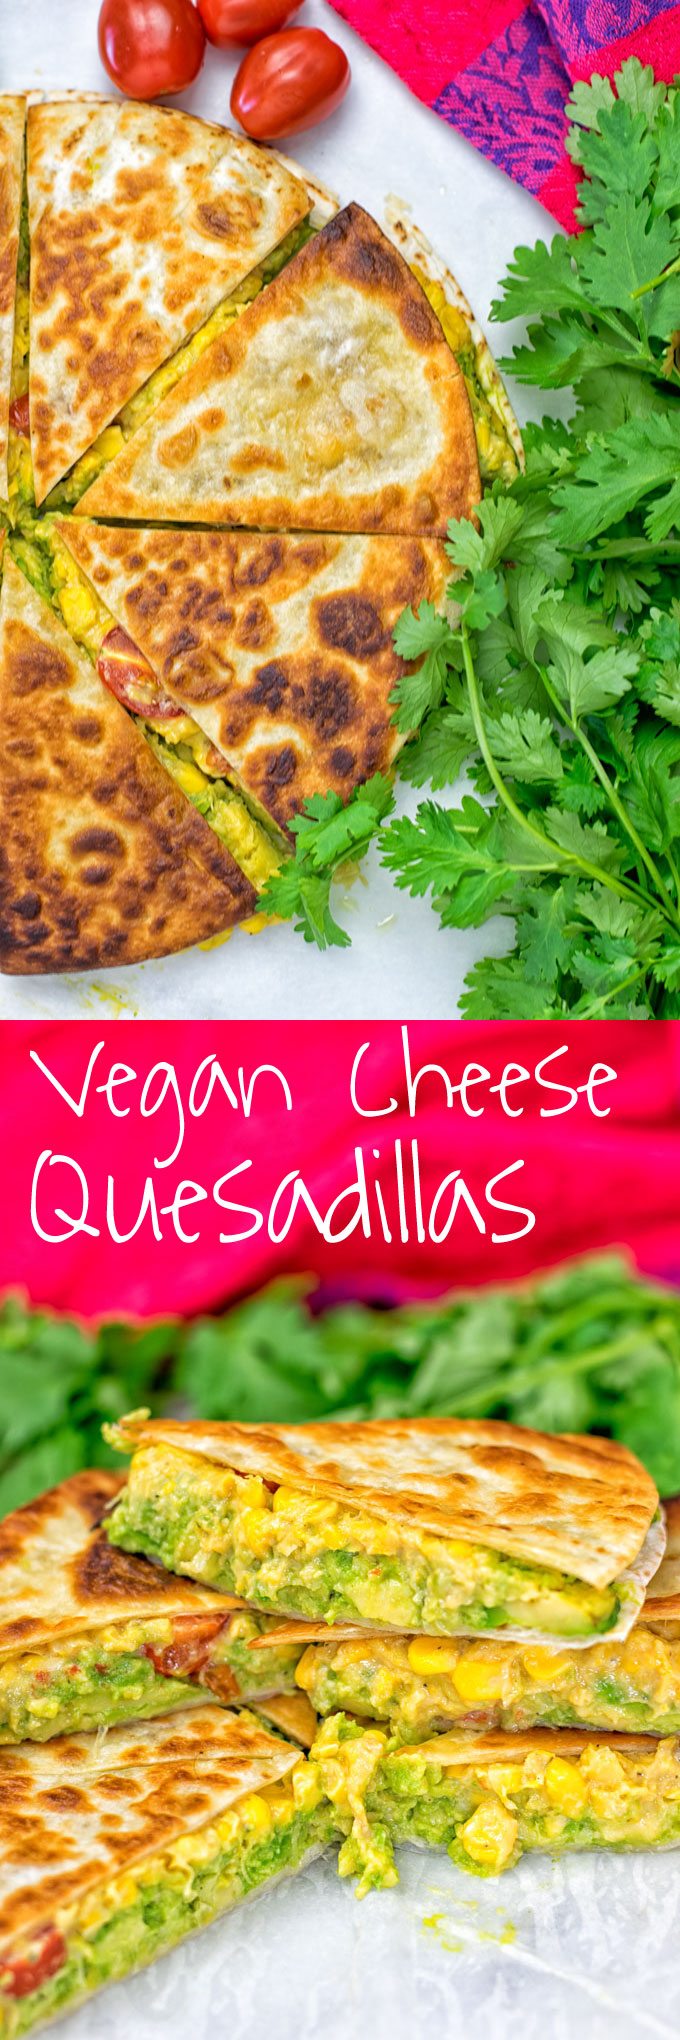 Collage of two pictures id the Vegan Cheese Quesadillas with recipe title text.